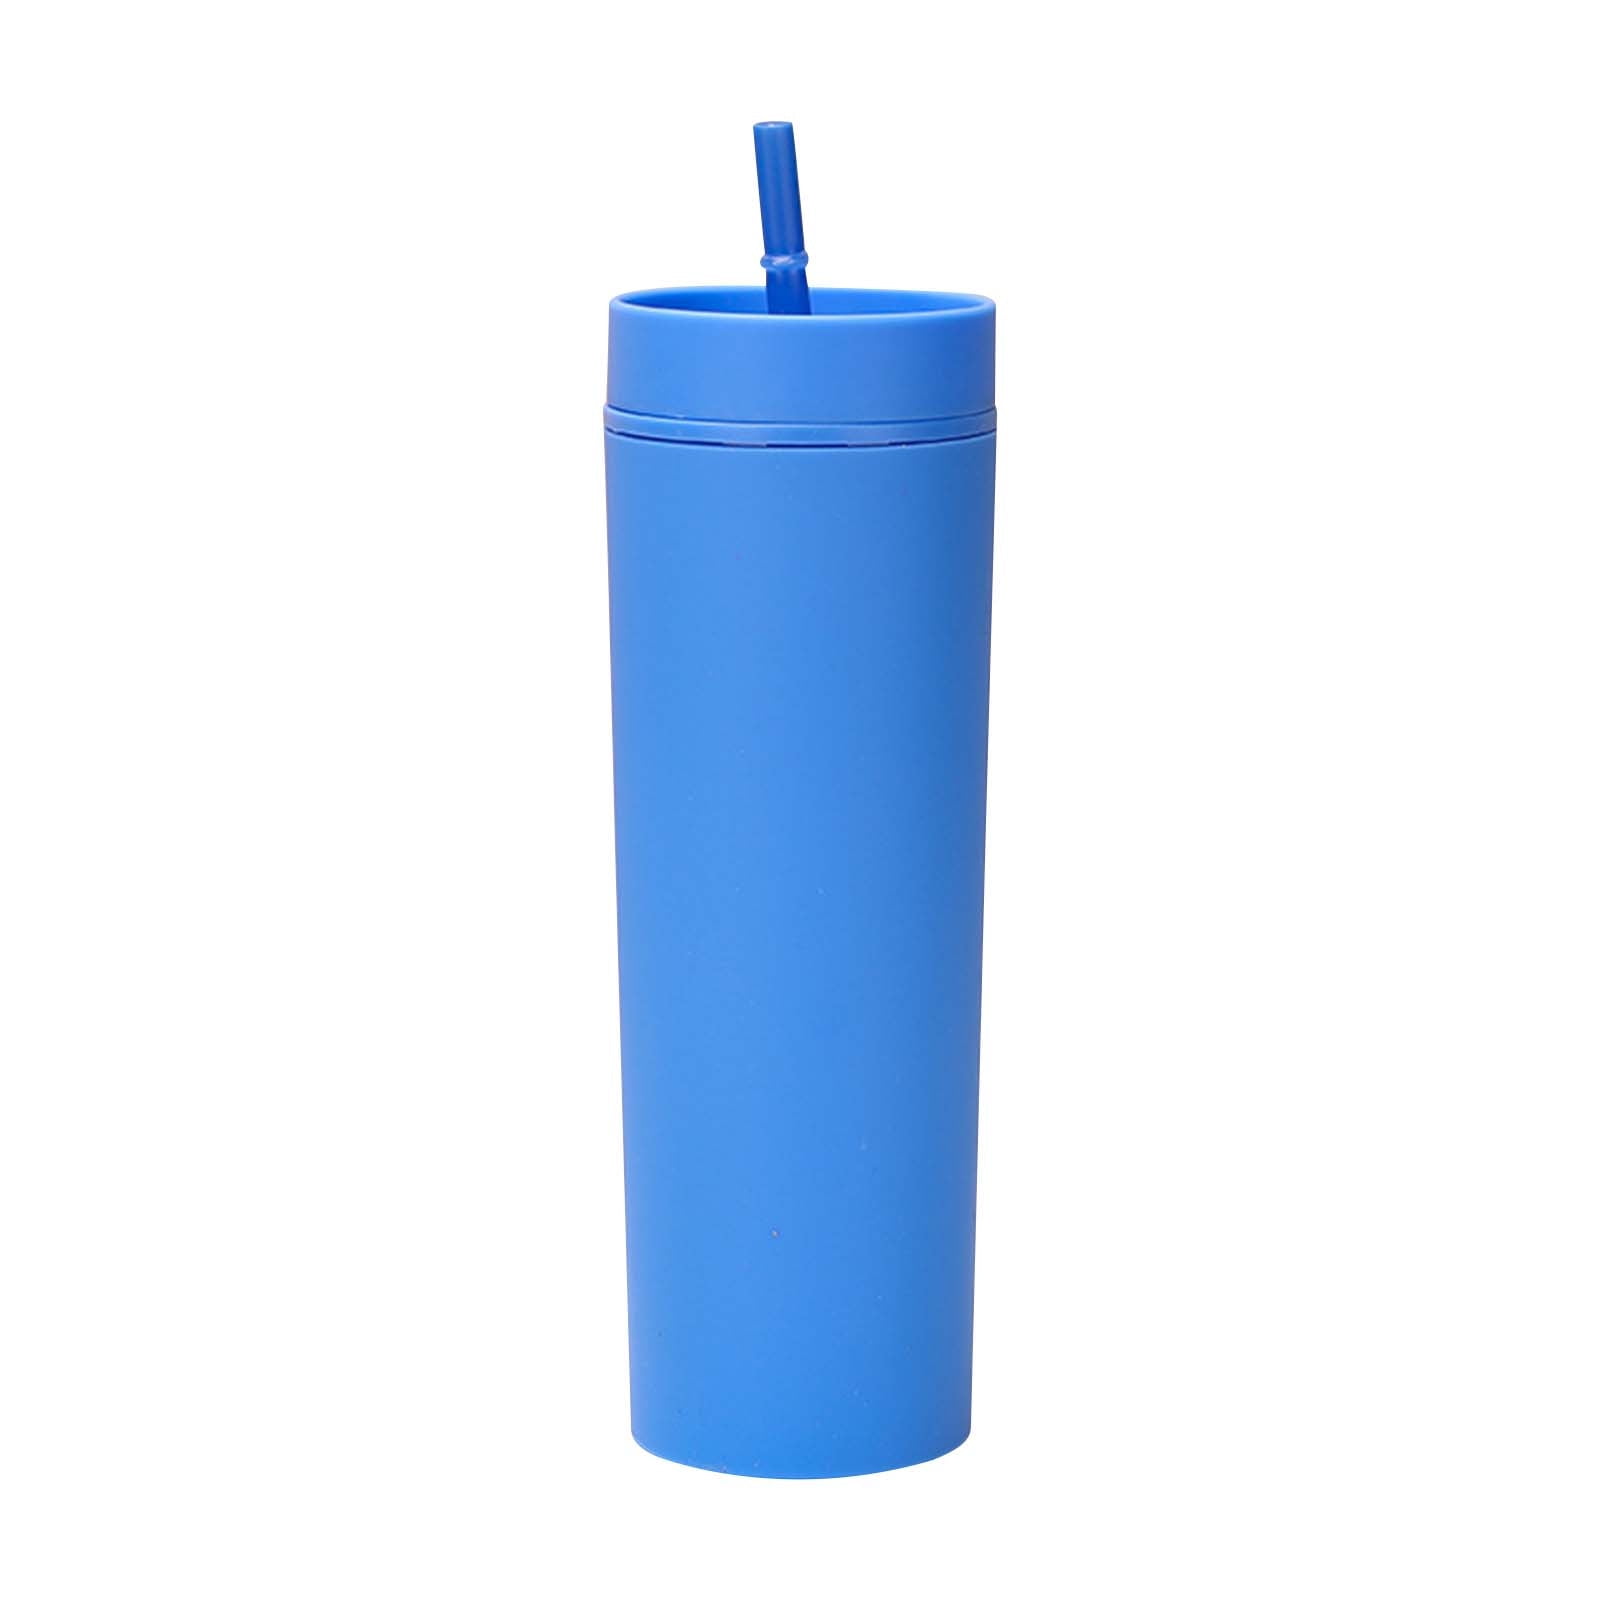 Ezhydrate Skinny Tumblers (4 Pack) - Blue- 16oz Matte Pastel Colored Acrylic Tumblers with Lids and Straws | Double Wall Plastic Tumbler with Lid